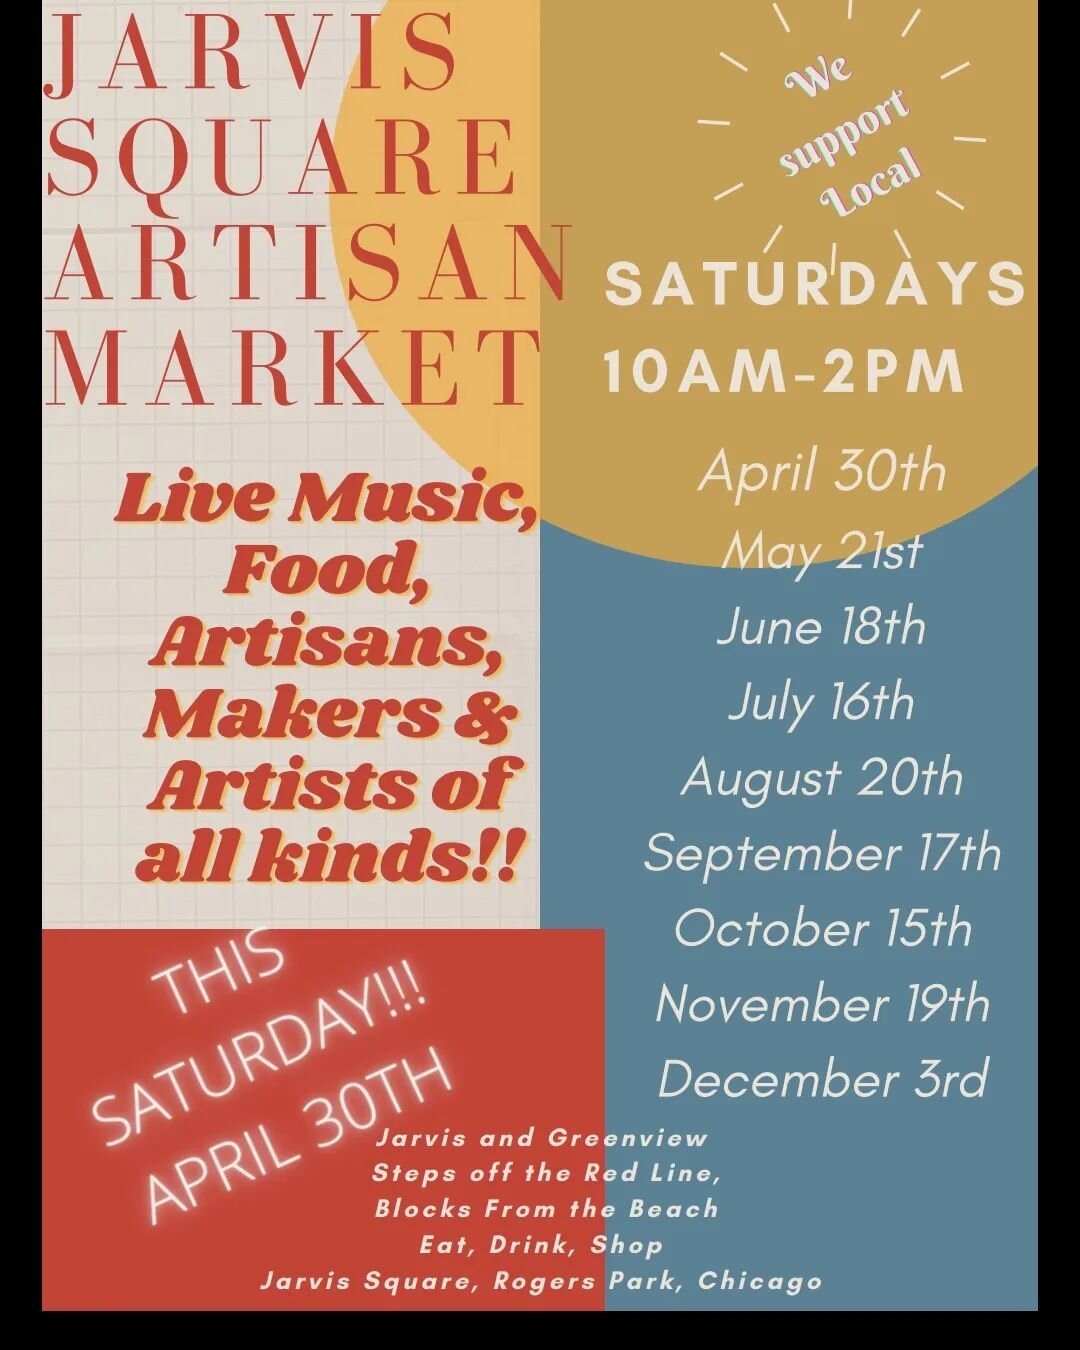 Stop by #jarvissquare this Saturday: Browse bags, have brunch, meet people.... 20% off all bags 
*
*
*
#jarvissquareartisanmarket #rogerspark #chicagoartist #madeinchicago #handcraftedbags #custombag #rogersparkartist #oneofakindbag #uniquegifts #chi